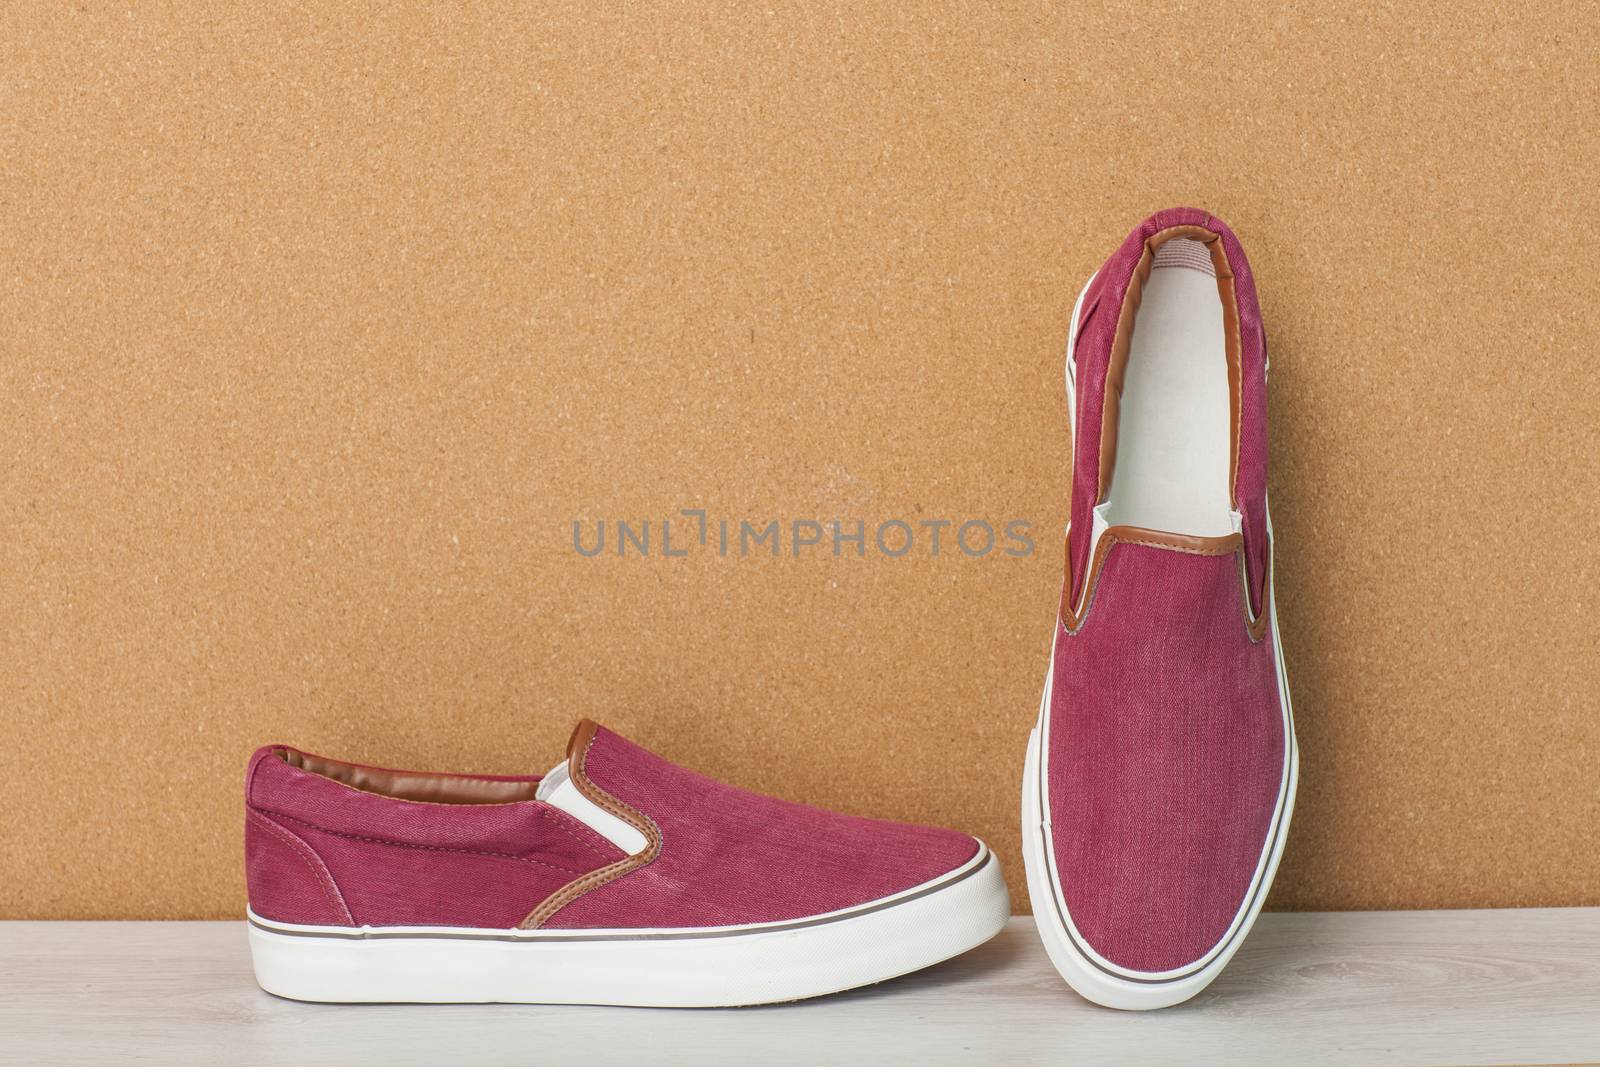 Red Sneaker on a Wood Background, slip-on shoes